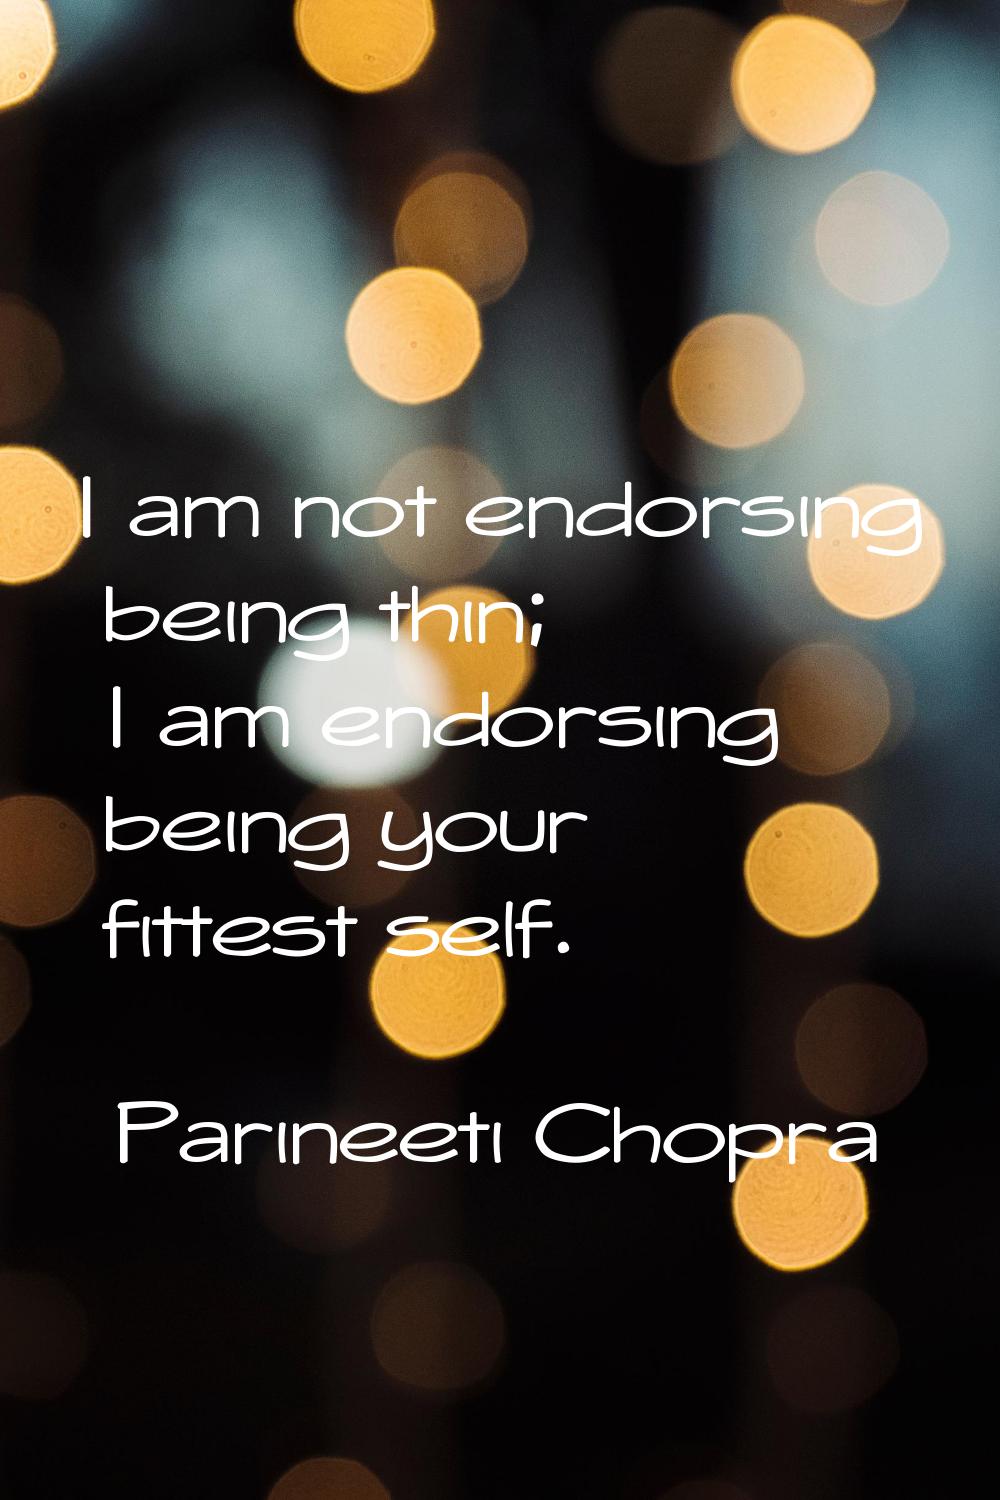 I am not endorsing being thin; I am endorsing being your fittest self.